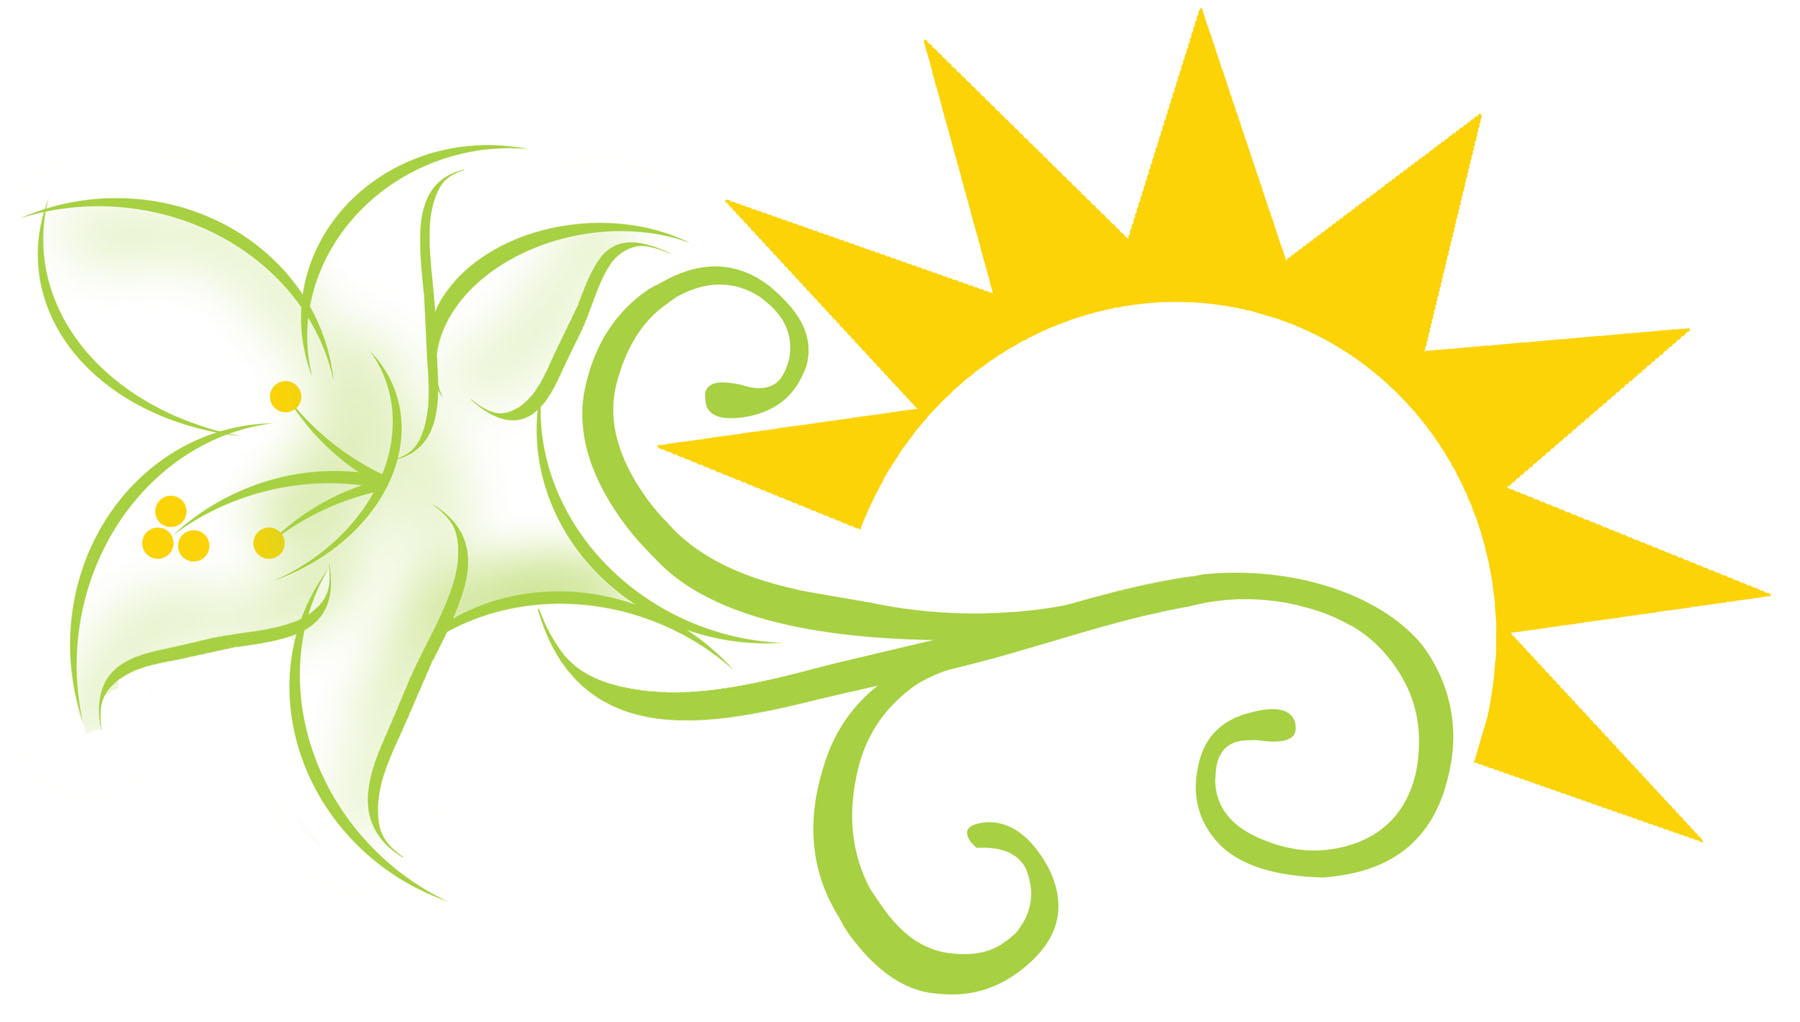 Easter Lily Clipart Free . Il